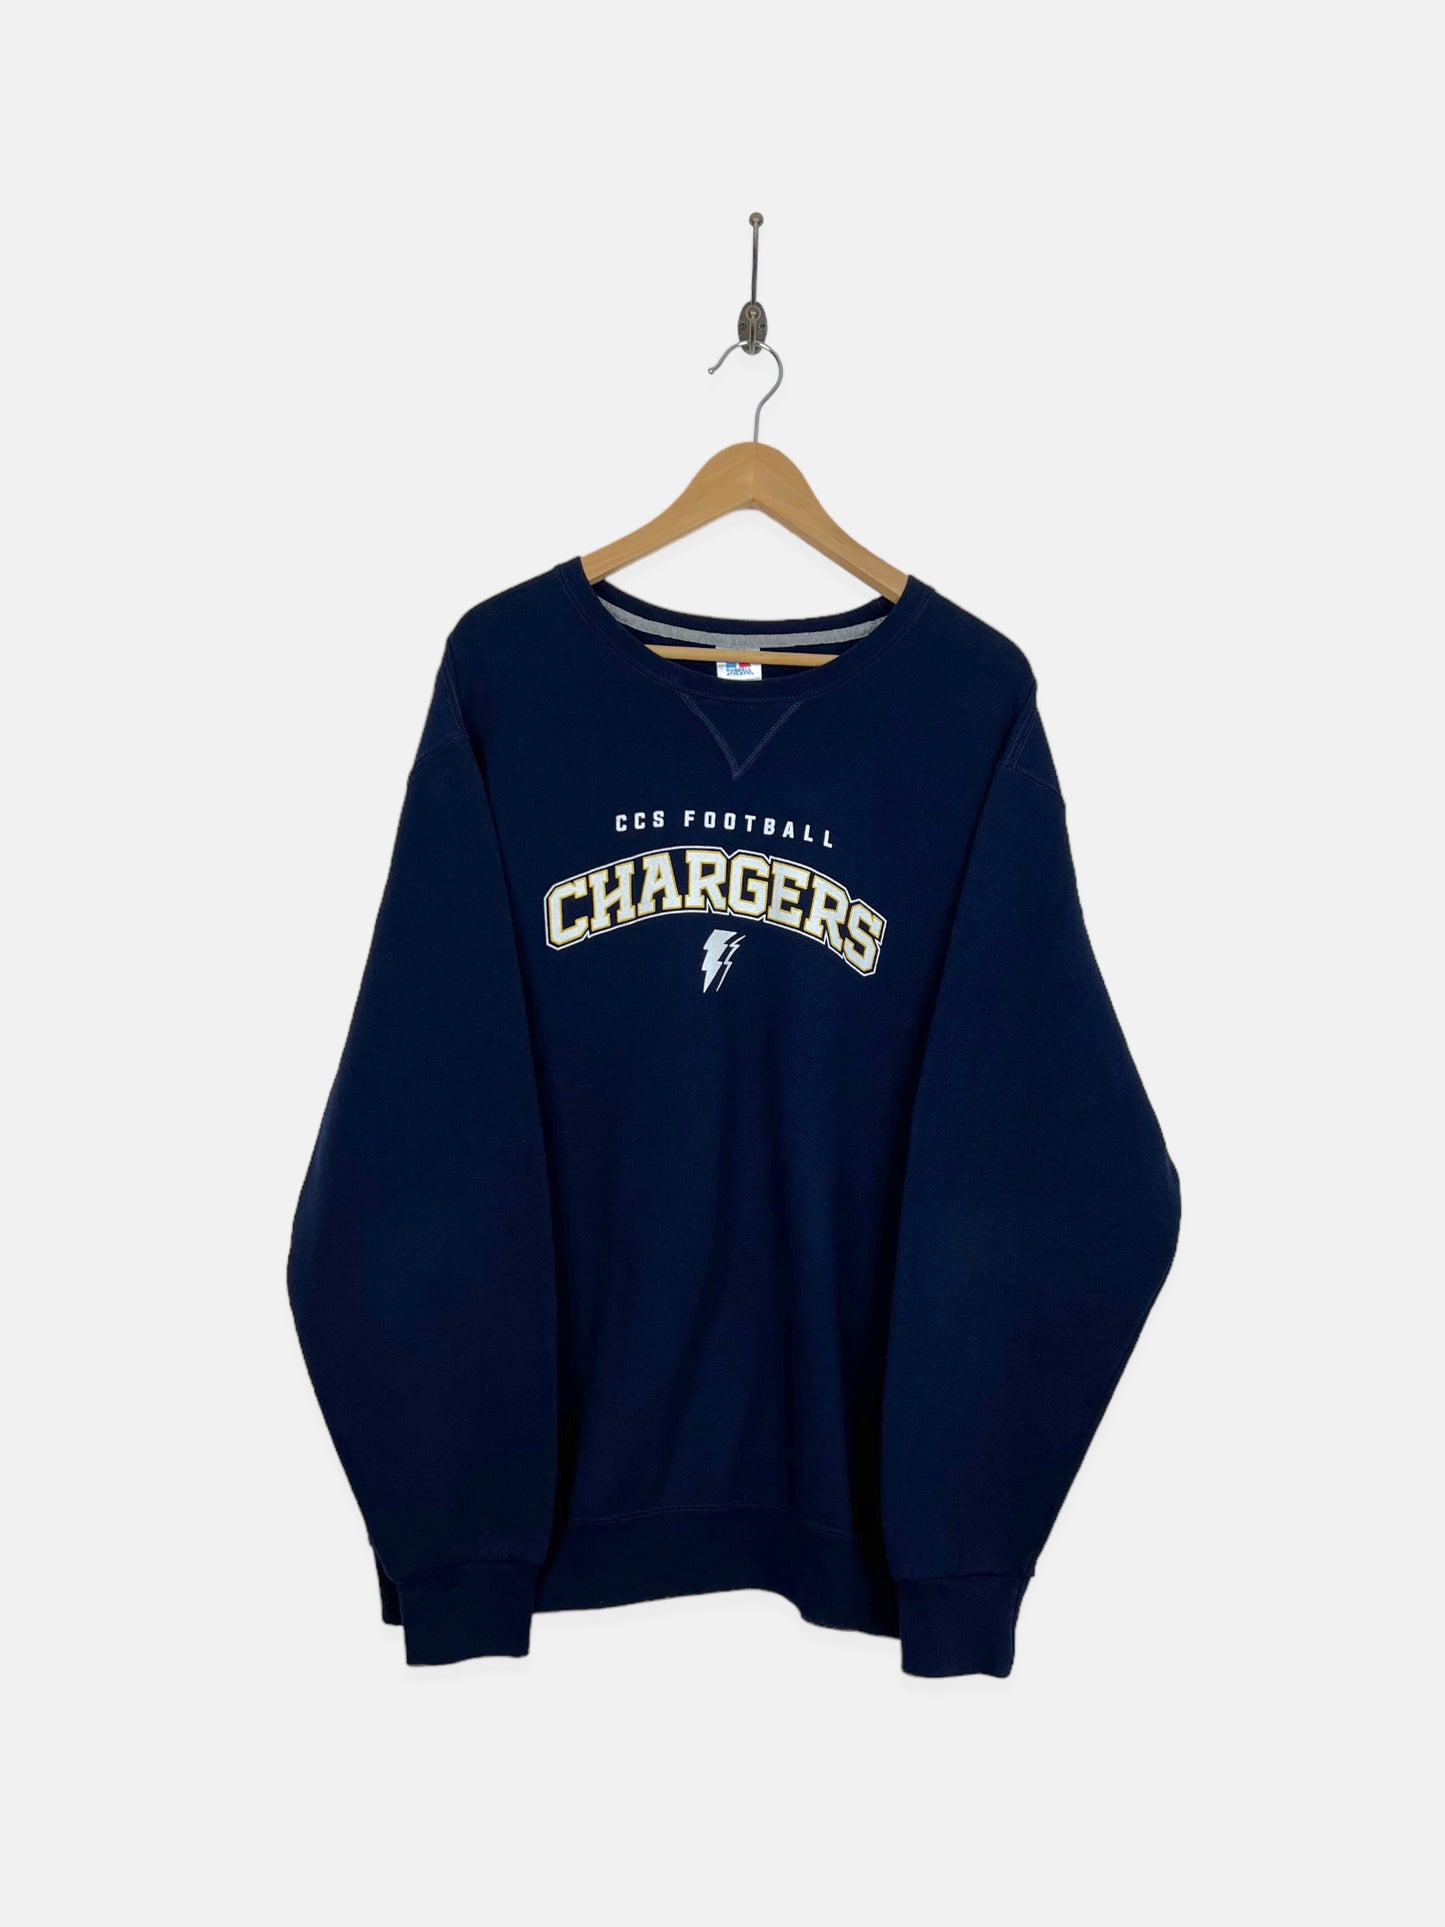 90's CSS Chargers Football Vintage Sweatshirt Size XL